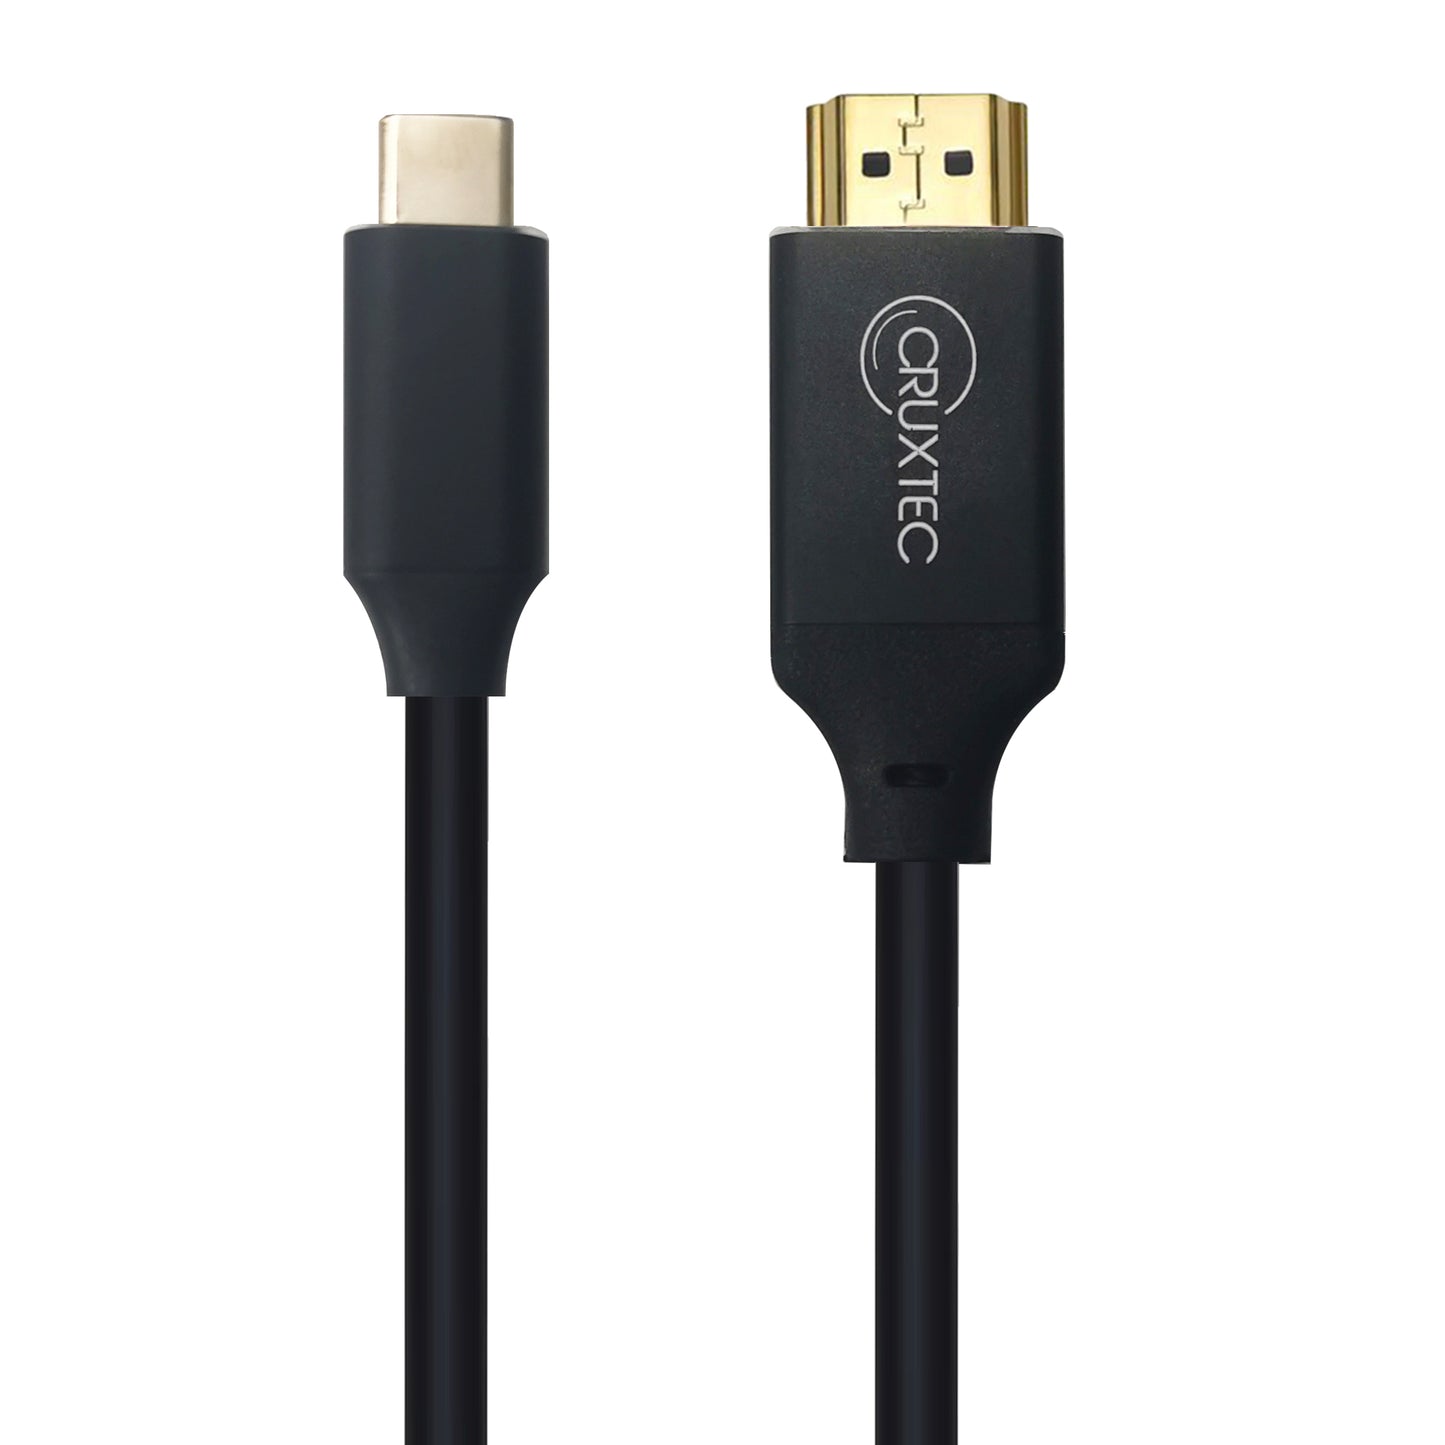 Cruxtec USB-C to HDMI 2.0 Cable 4K/60Hz Support HDR